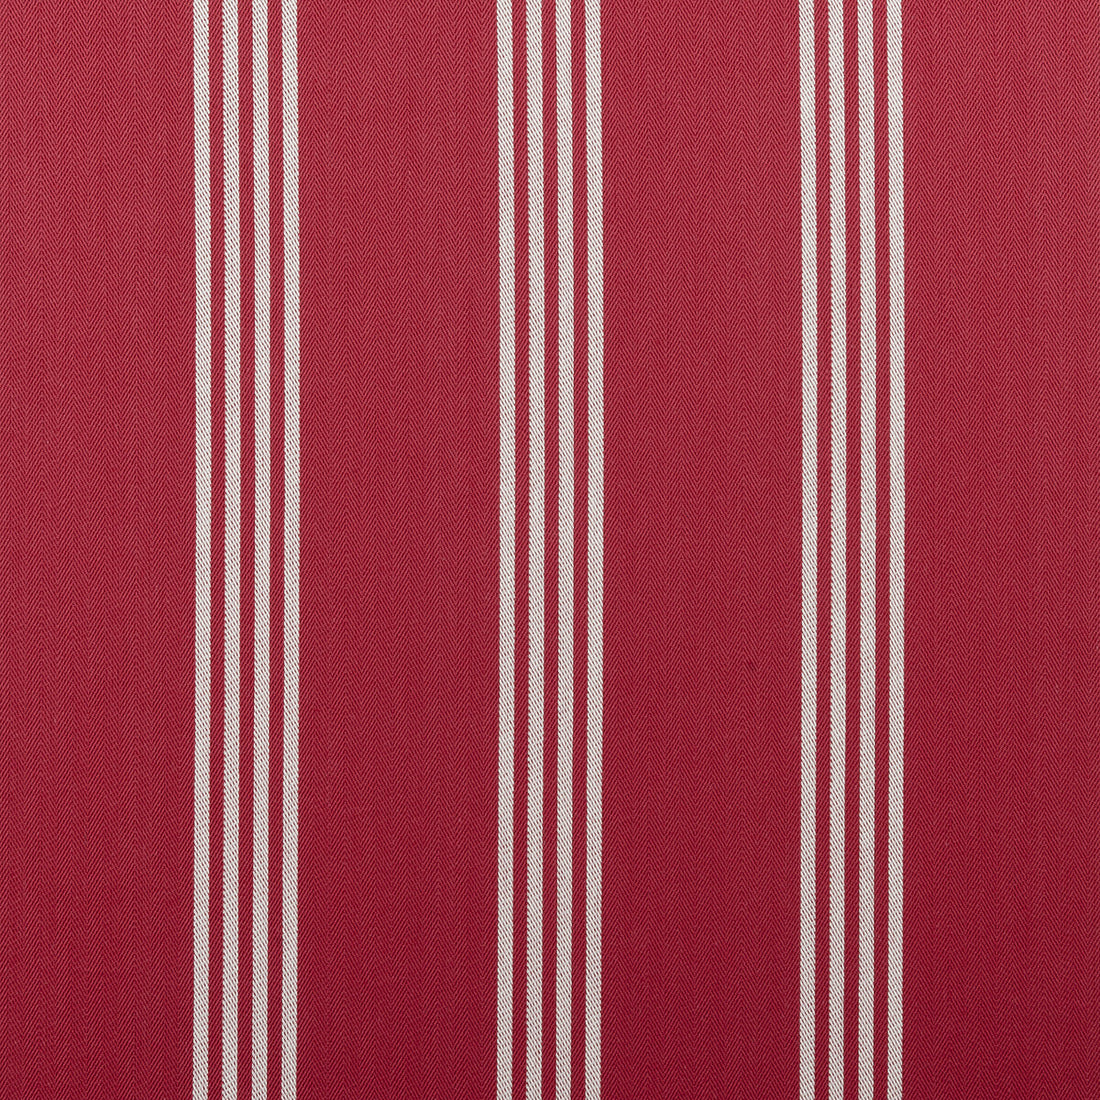 Marlow fabric in red color - pattern F0422/05.CAC.0 - by Clarke And Clarke in the Clarke &amp; Clarke Ticking Stripes collection